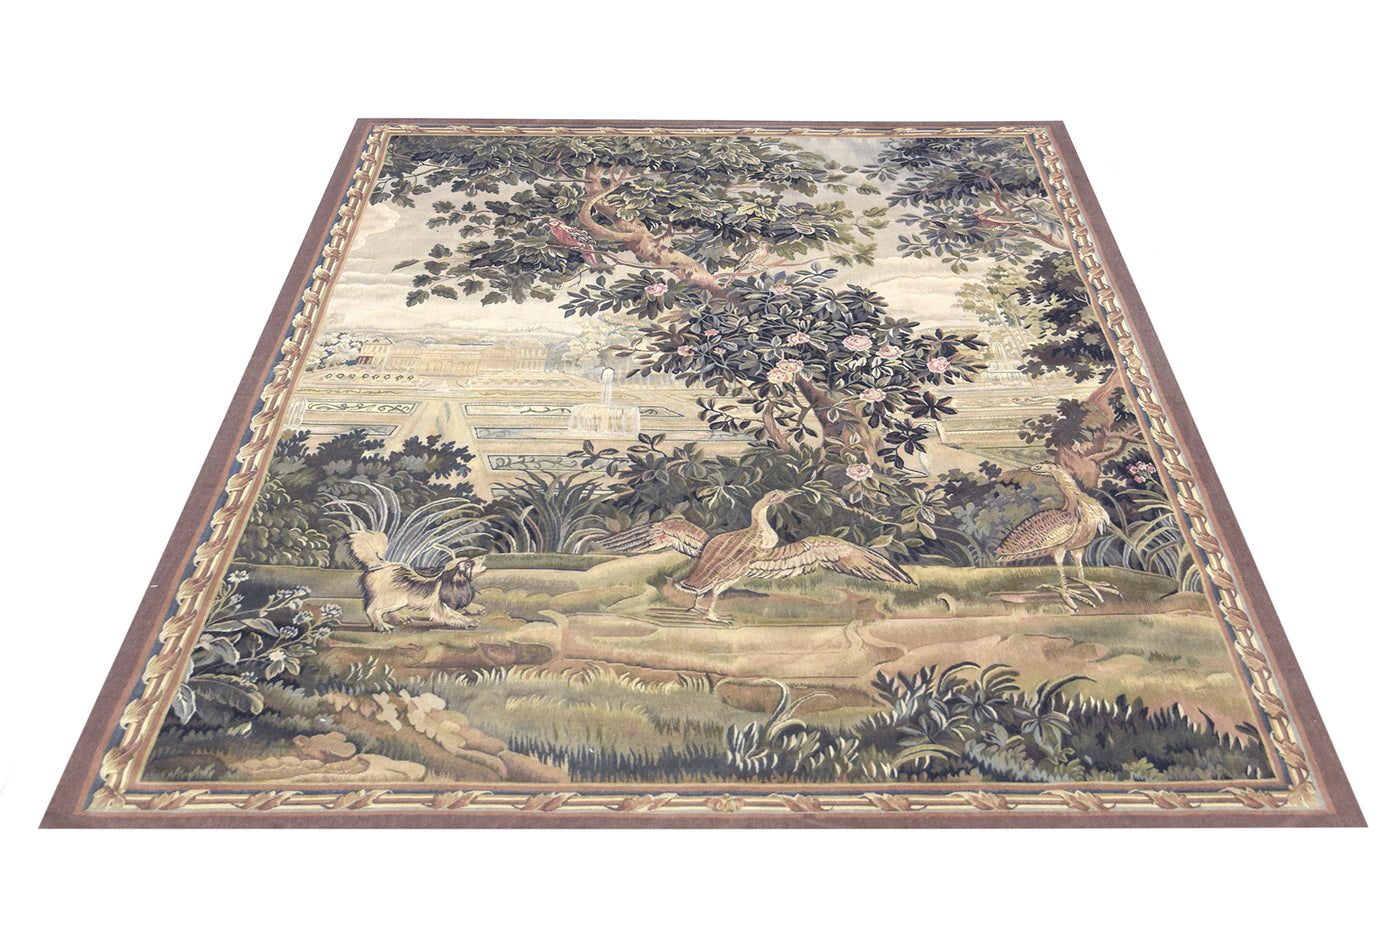 Tapestry Embroidery Scenery Rug